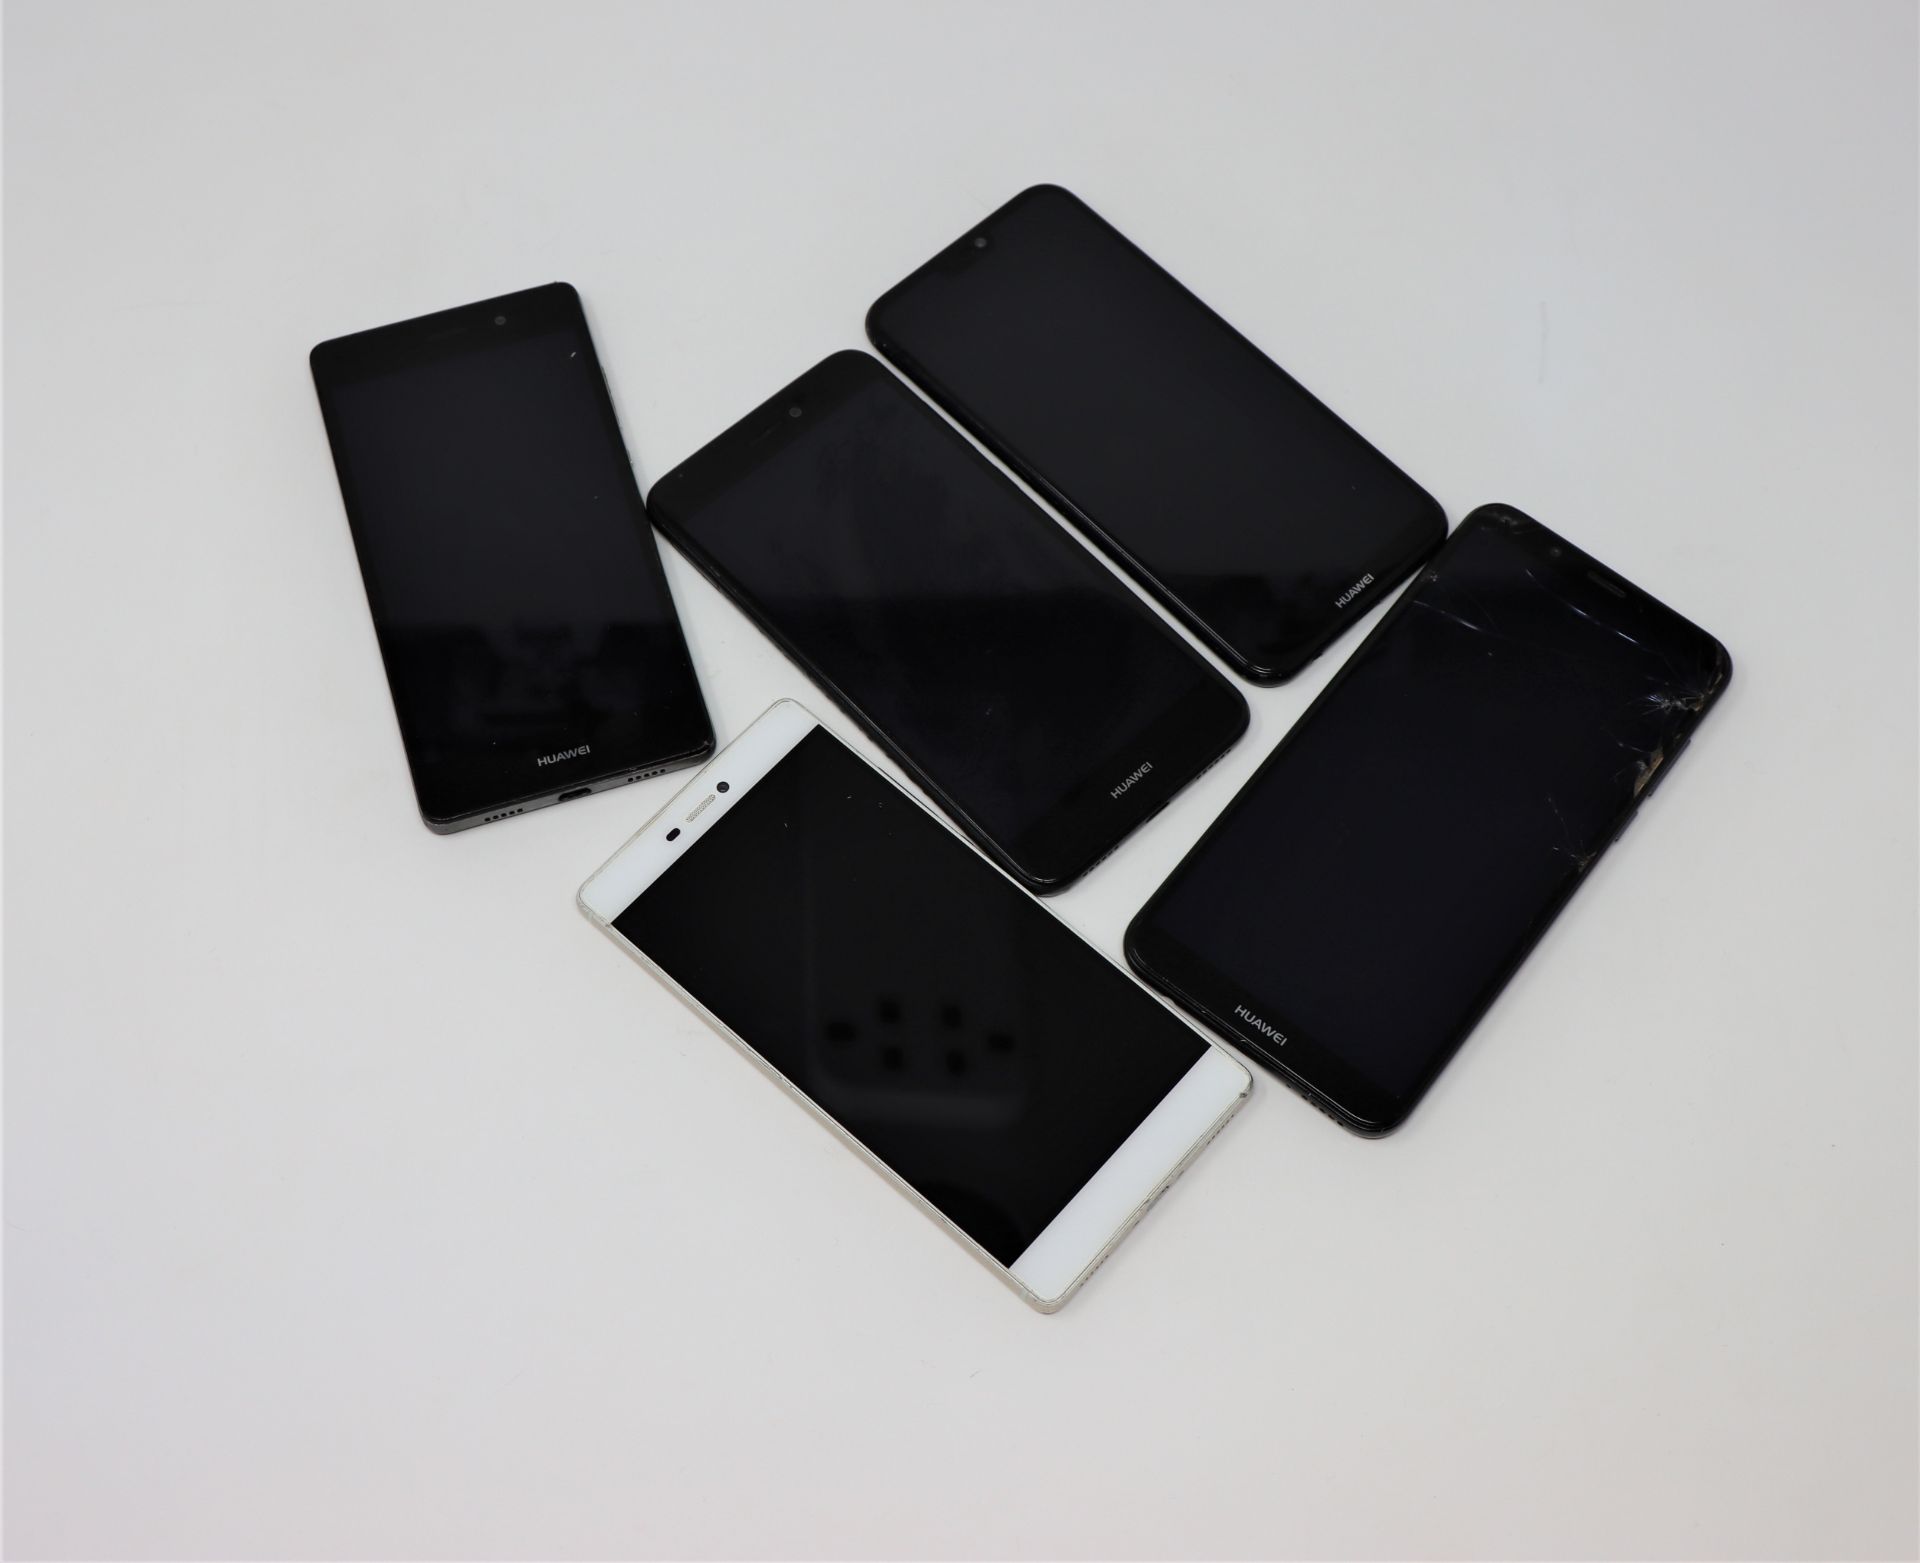 Five pre-owed Samsung smartphones sold for parts; 1 x Huawei Y7 (2018) LDN-01, 1 x Huawei P20 Lite